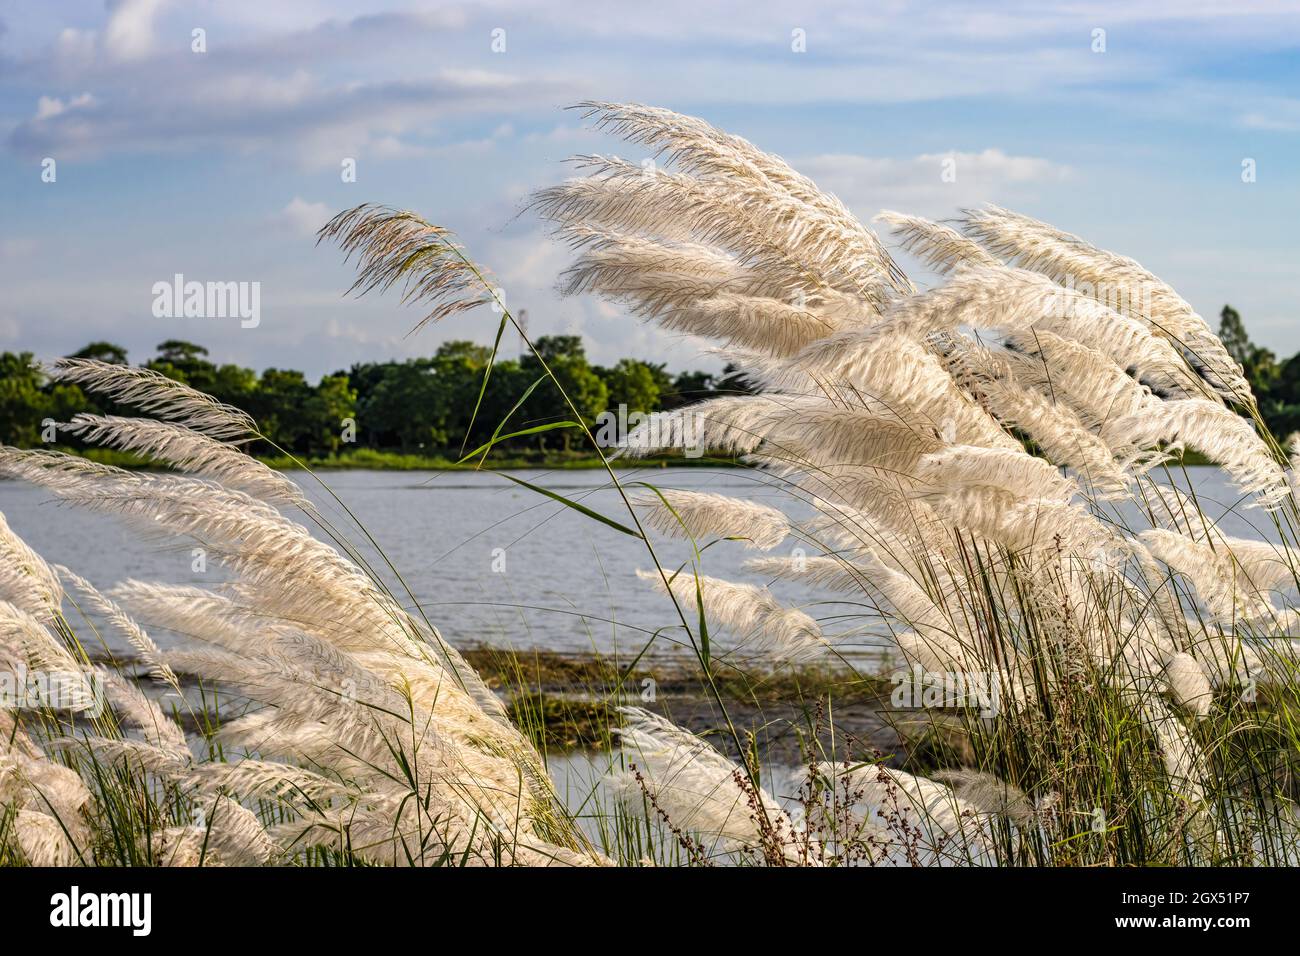 A bunch of kans grass or catkin flowers near the river in a rural village Stock Photo